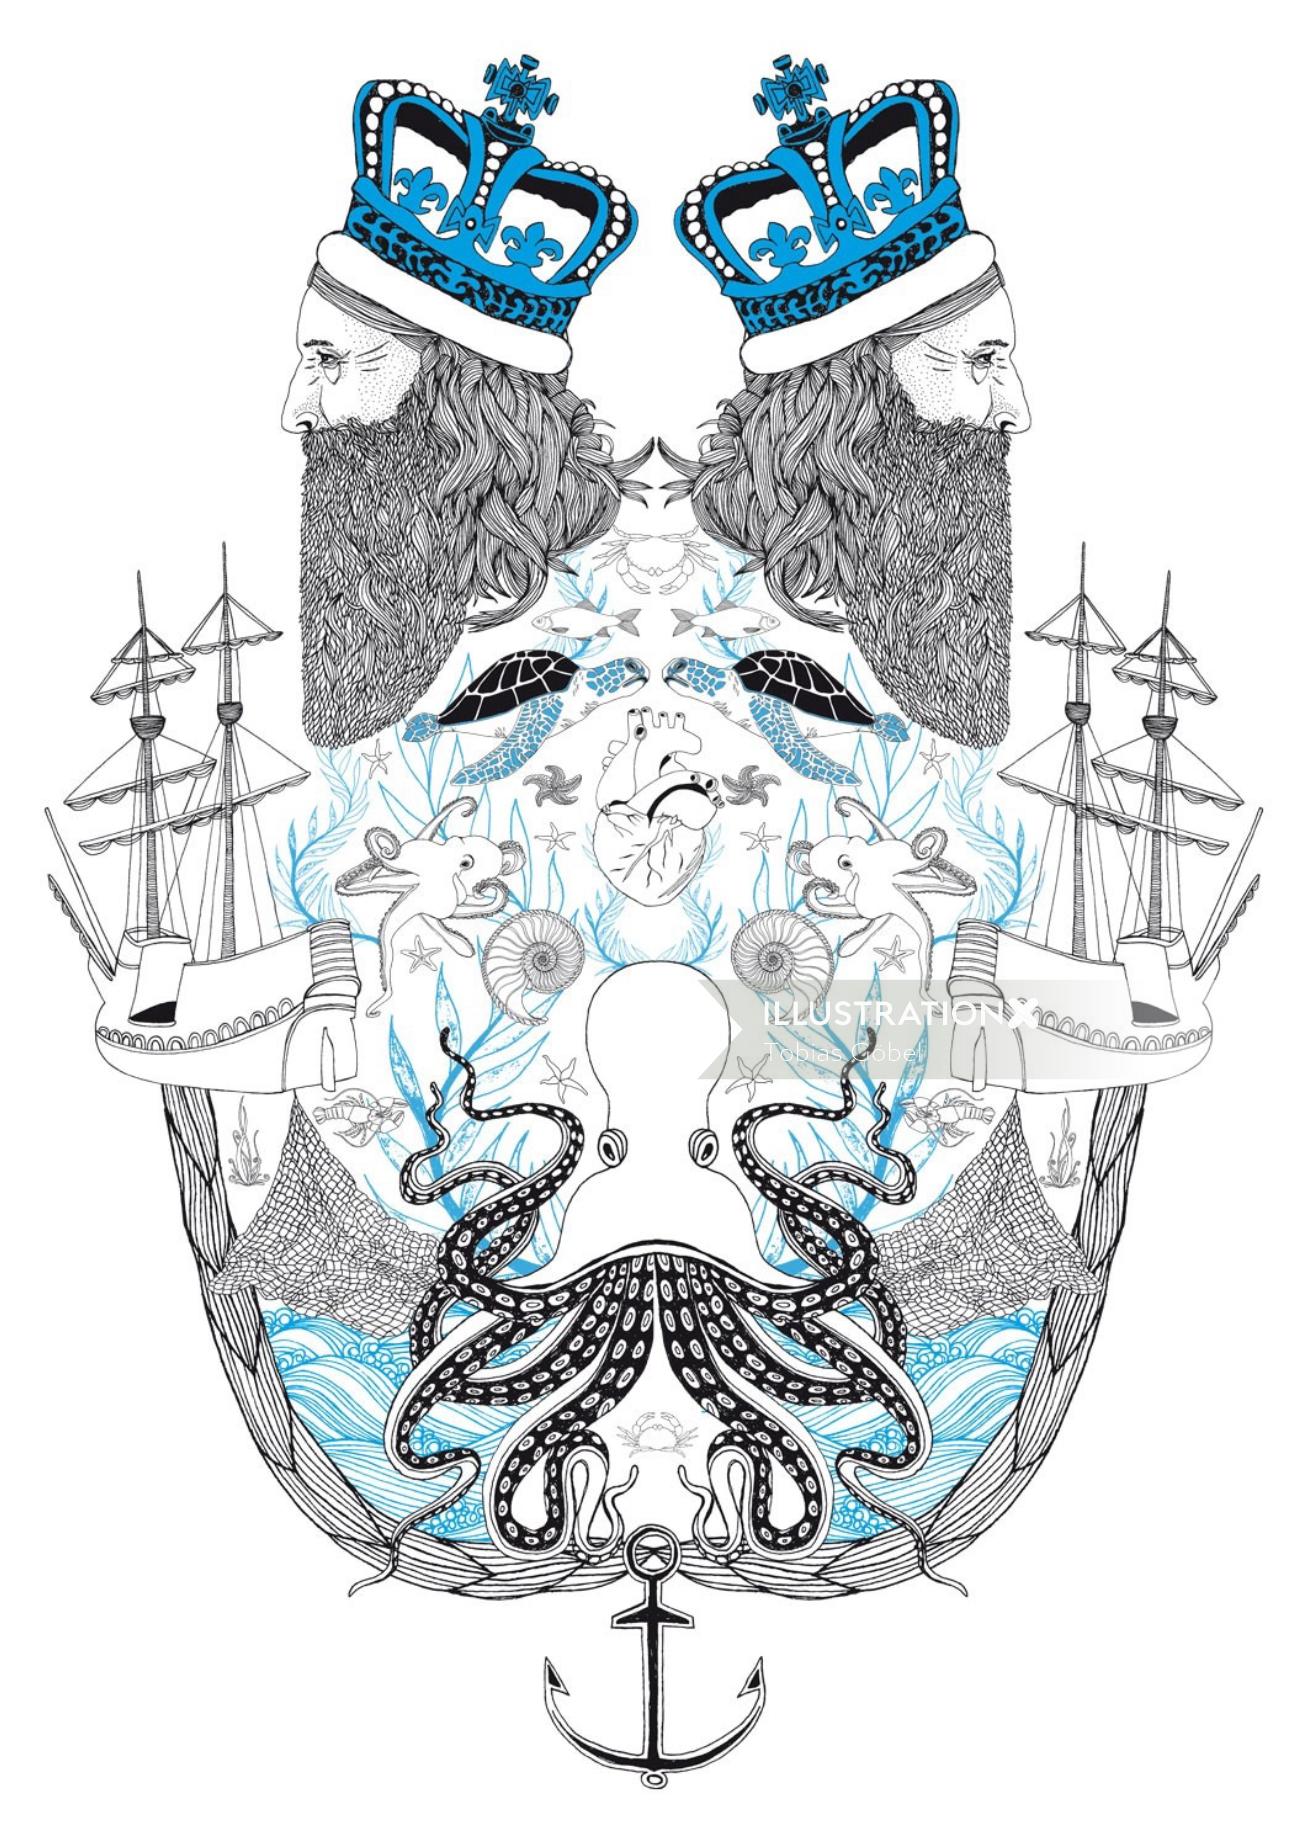 Line art mixed king and sea
